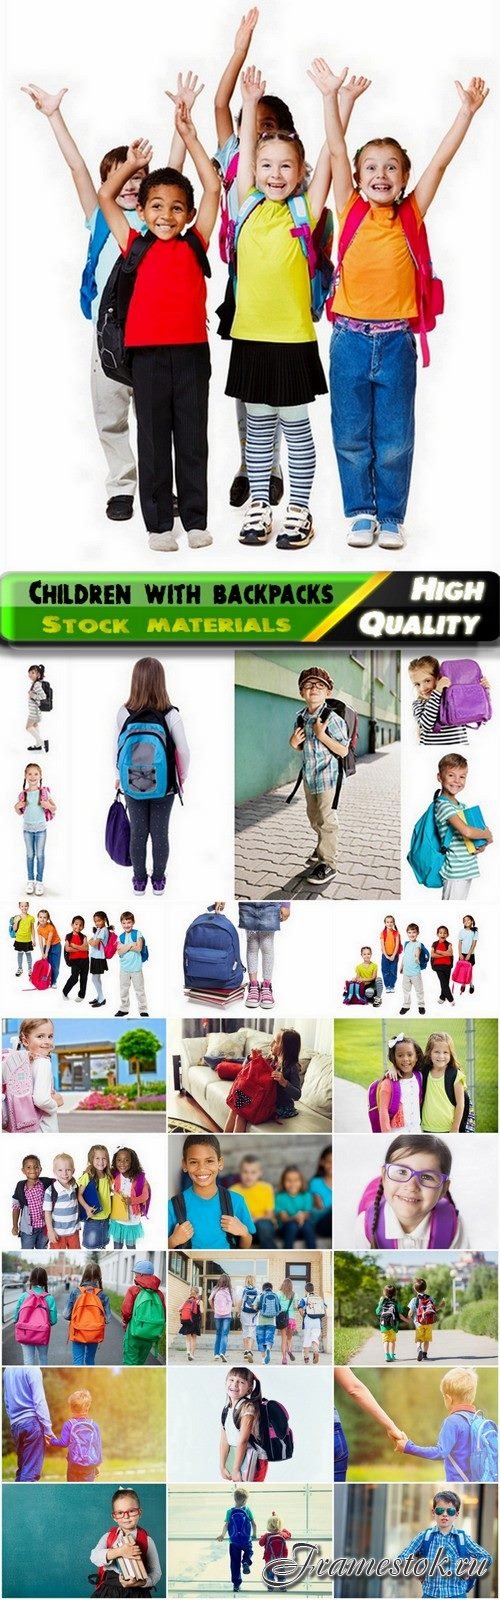 Children and pupils with backpacks - 25 HQ Jpg